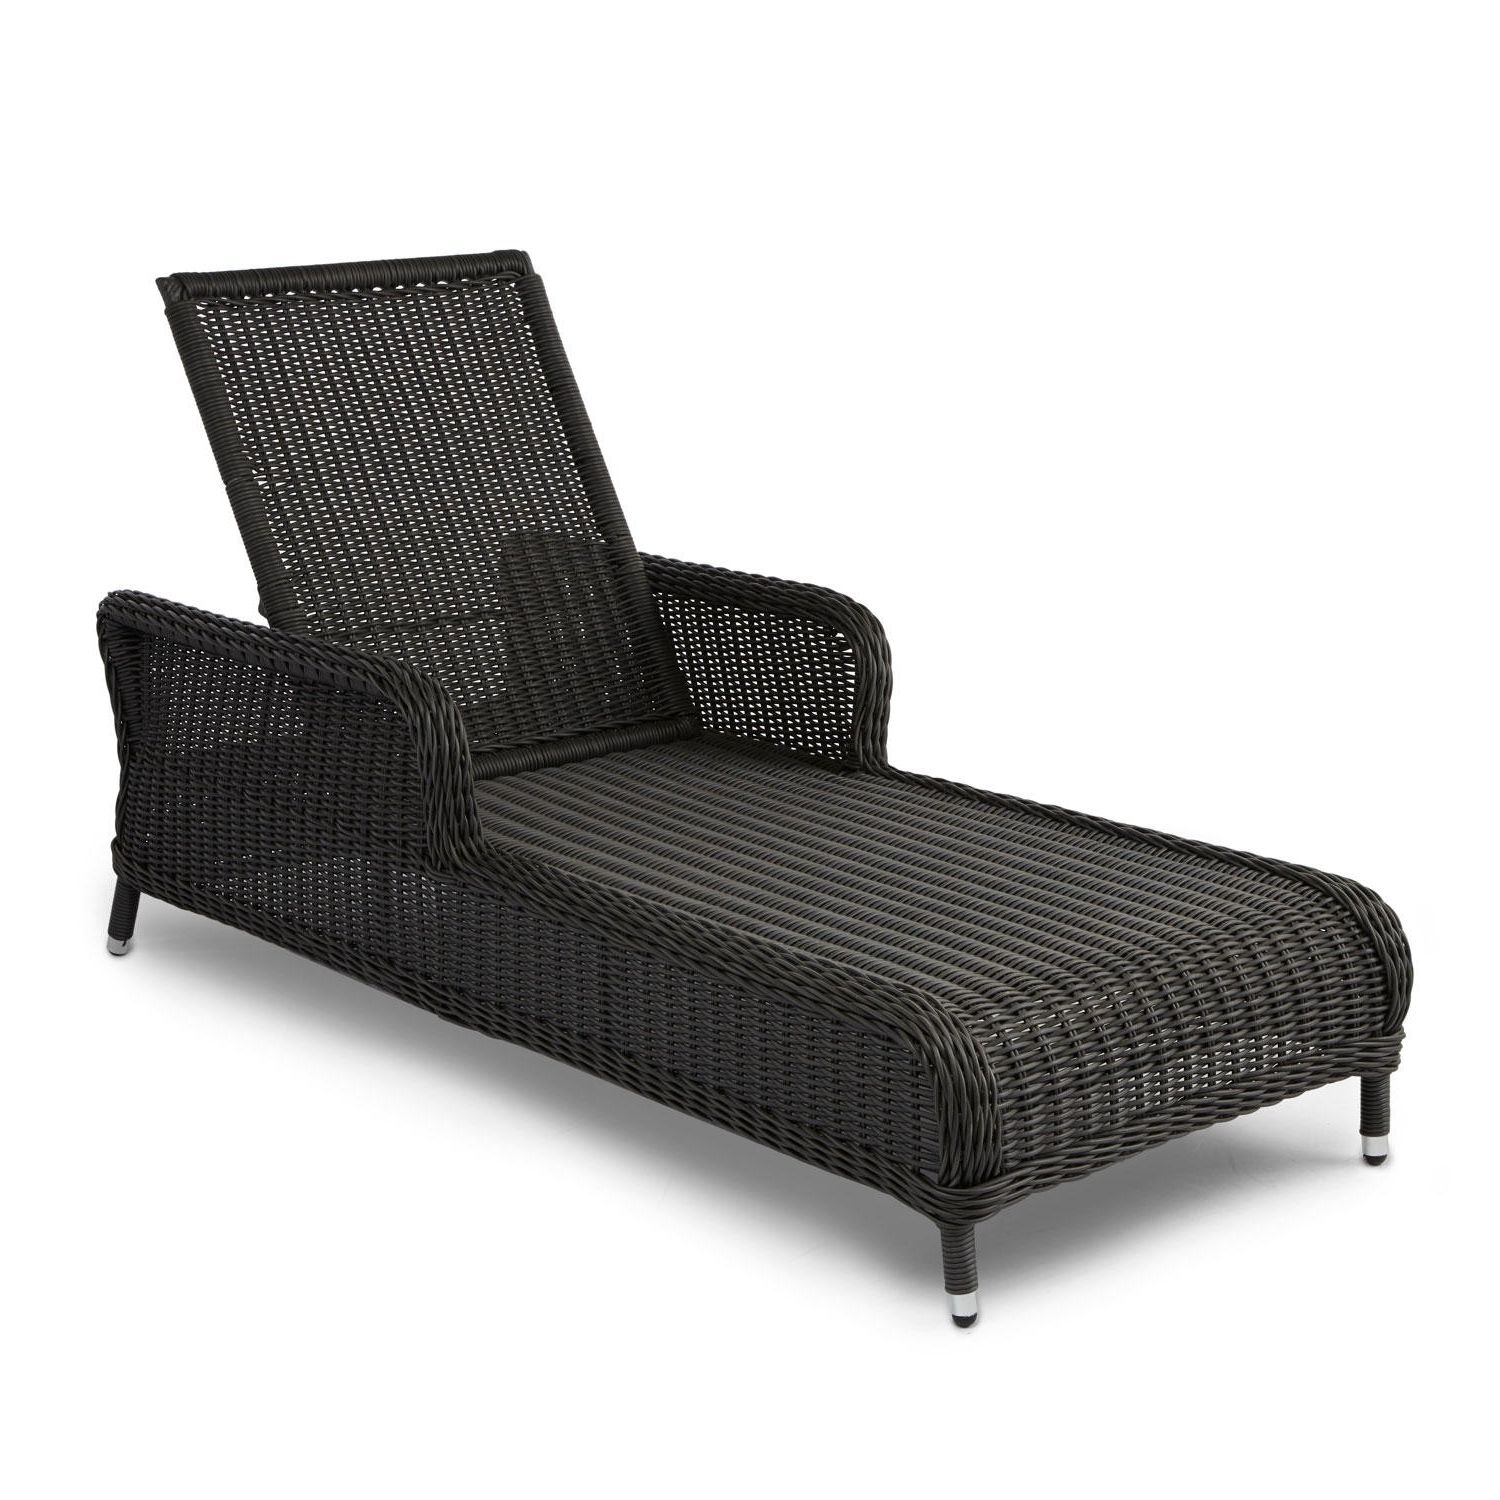 2017 Black Chaise Lounge Outdoor Chairs With Regard To Outdoor : Chaise Lounge Chairs Lowes Outdoor Patio Chaise Lounges (View 4 of 15)